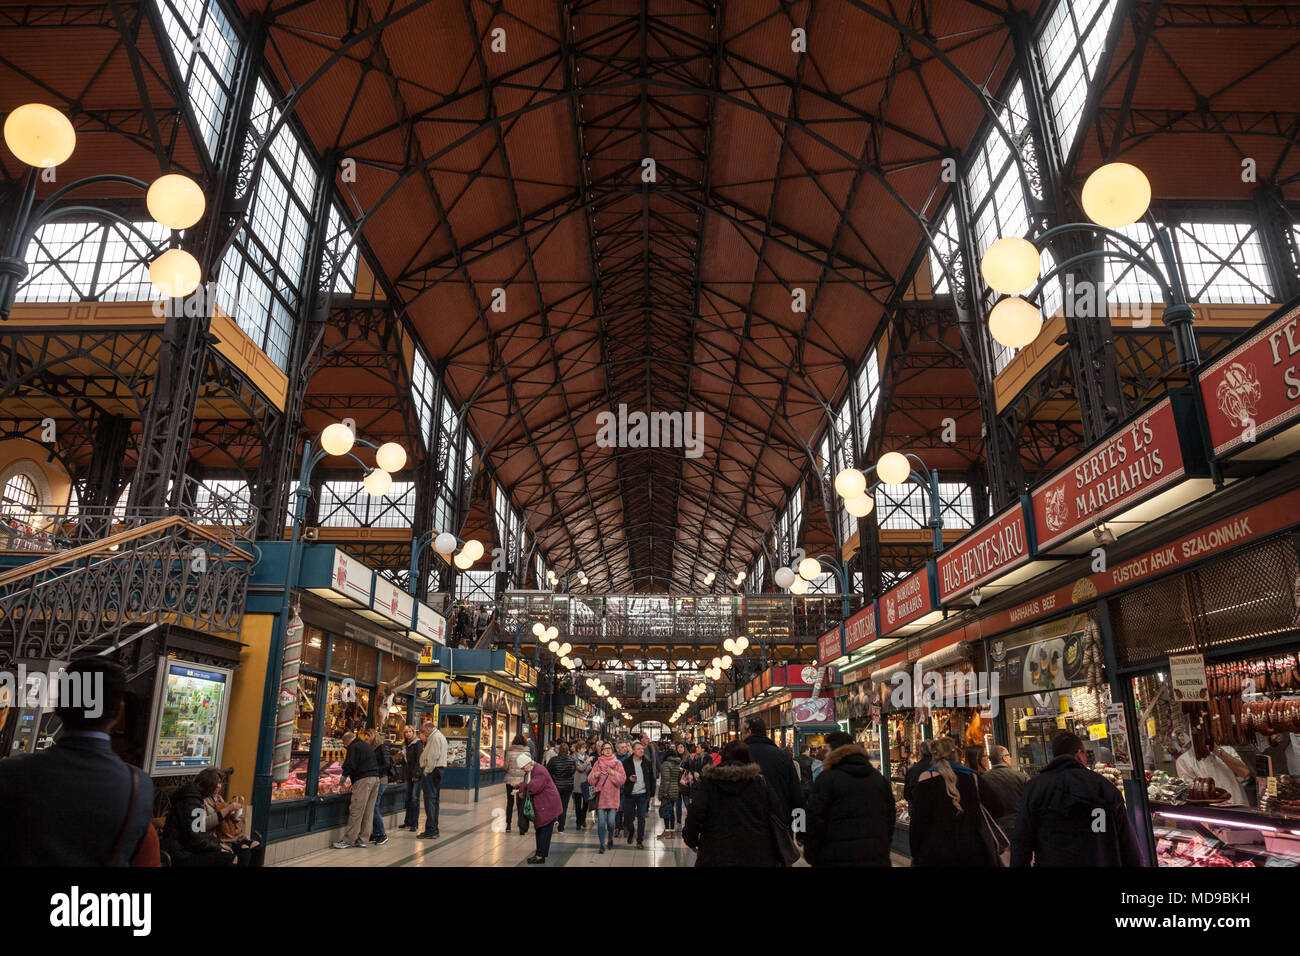 BUDAPEST, HUNGARY - APRIL 7, 2018: Interior of Budapest Great Market Hall (Nagy Vasarcsarnok) with a crowd in front. it is the biggest market hall of  Stock Photo